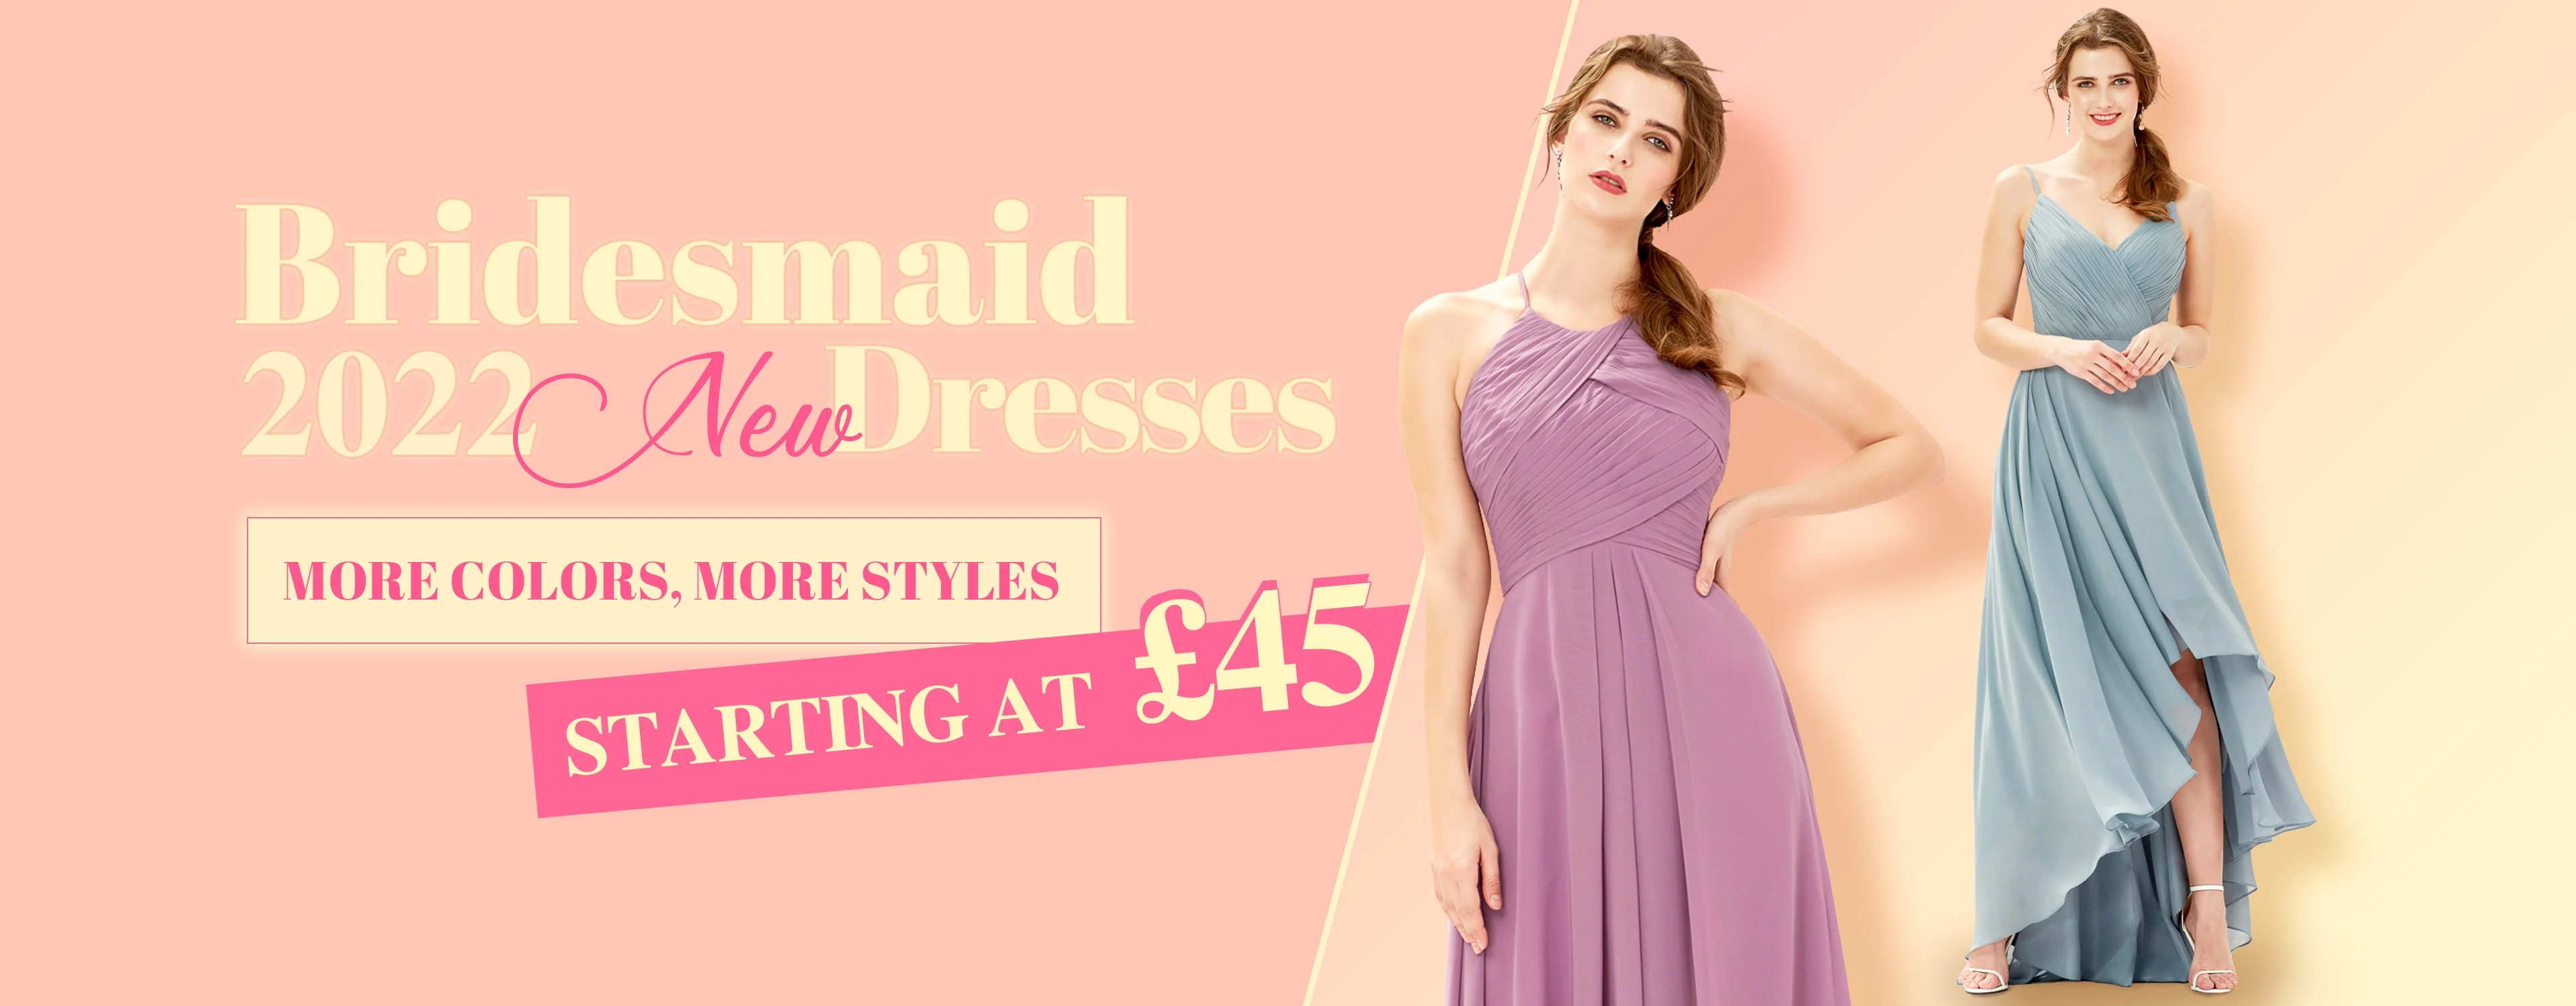 2022 Bridesmaid Dresses within the Most Popular Styles